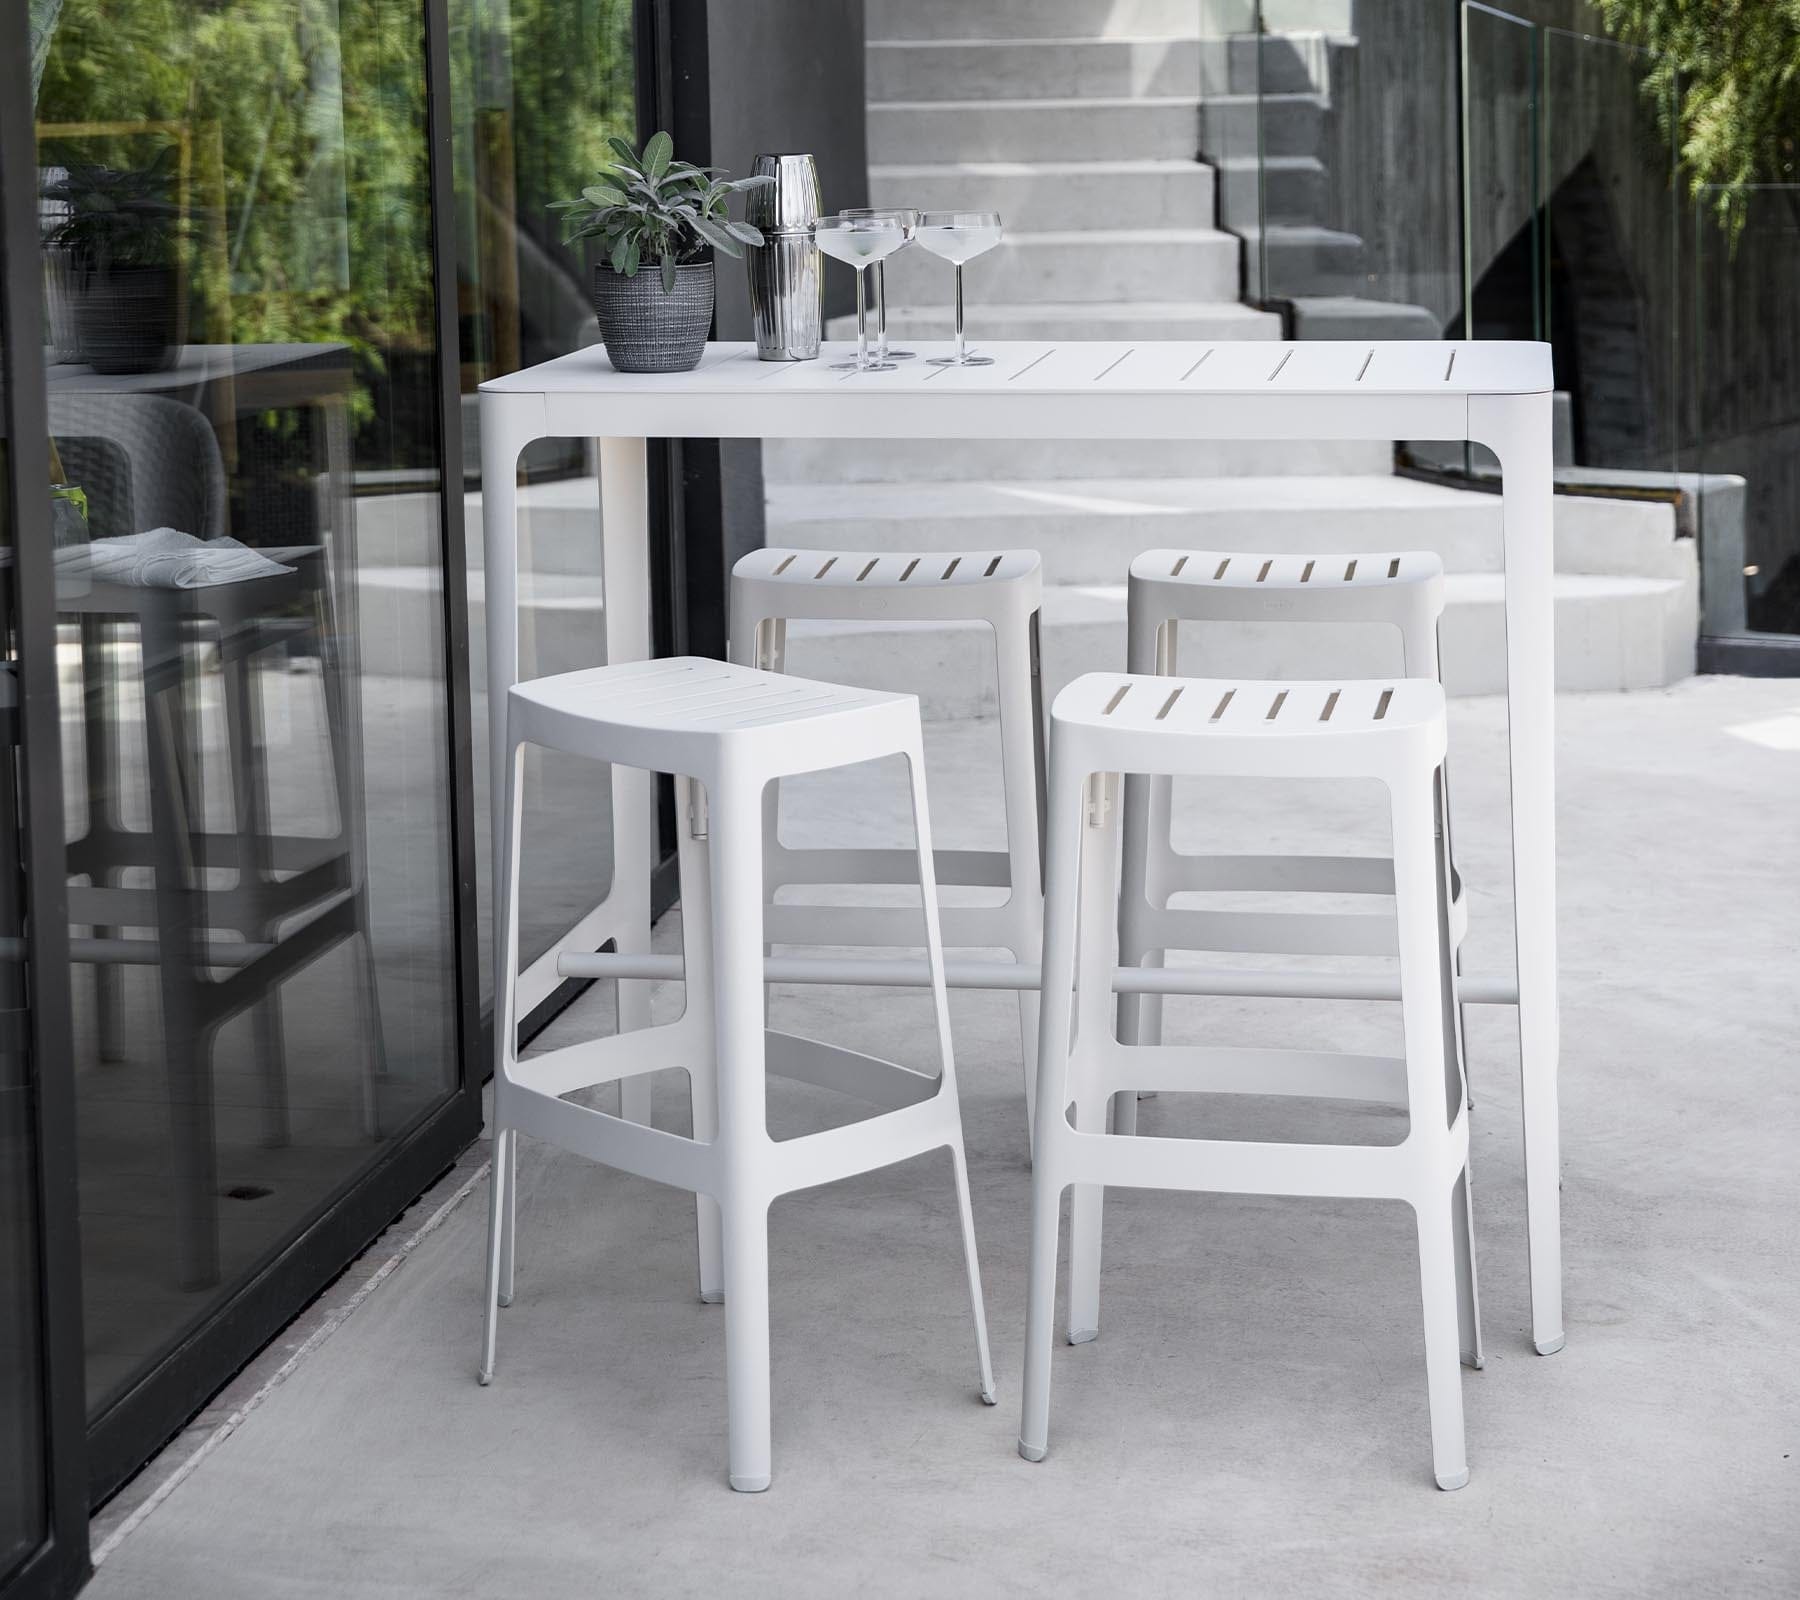 Boxhill's Cut High Outdoor Bar Table White lifestyle image with Cut High Outdoor Bar Chair at patio